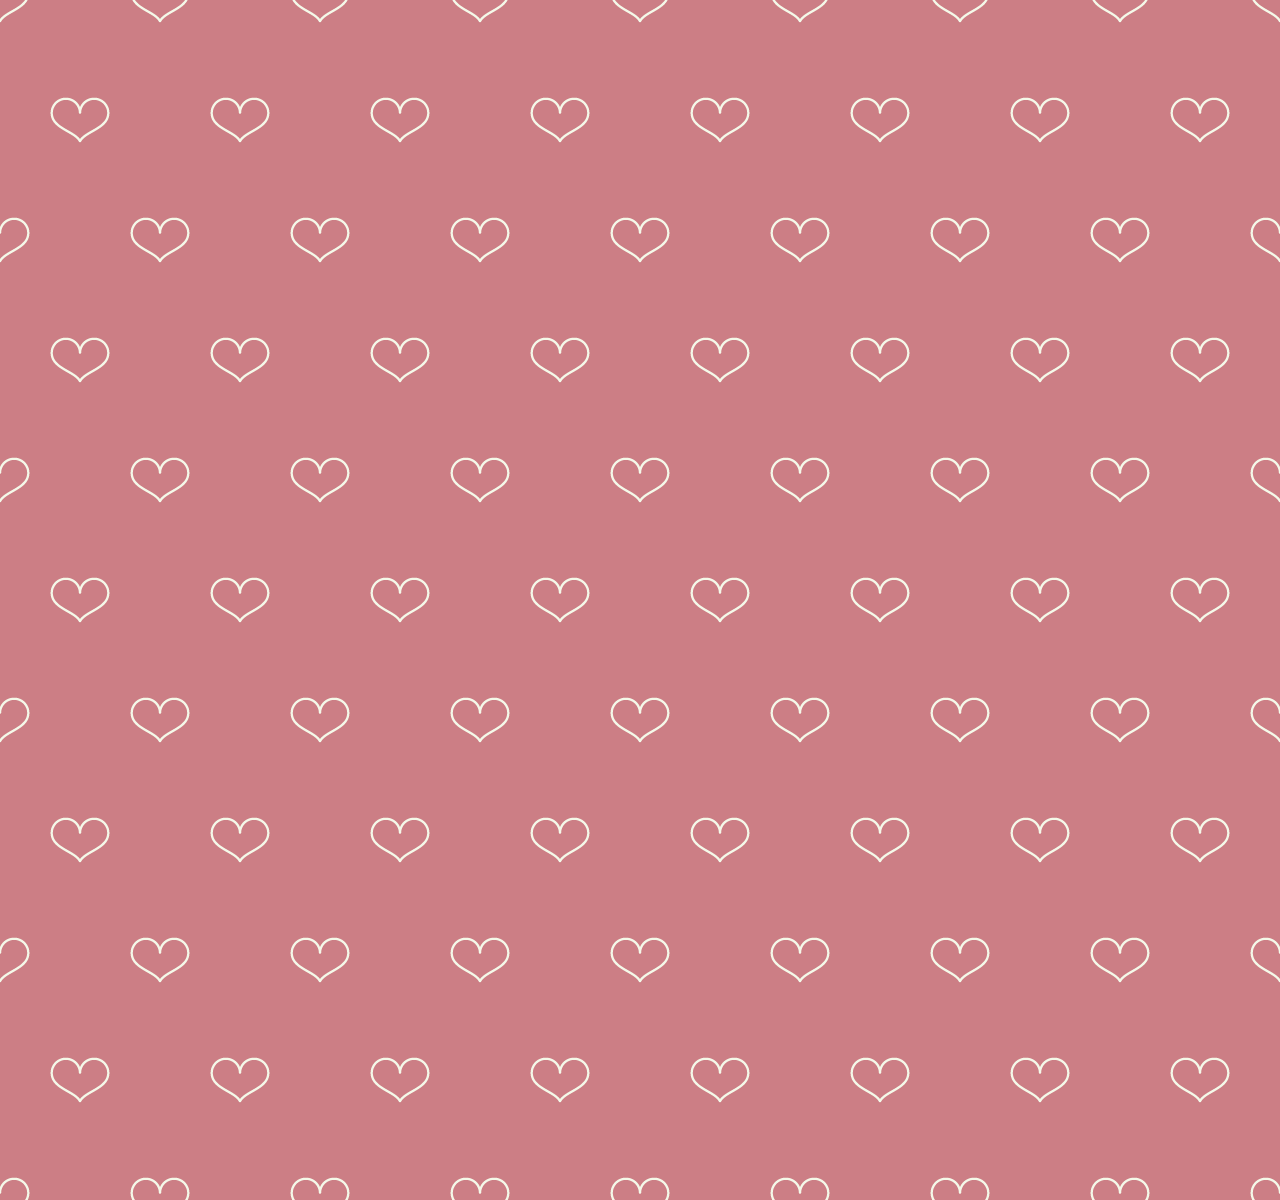 Outline Hearts Vector Pattern On Coral Background (SVG)